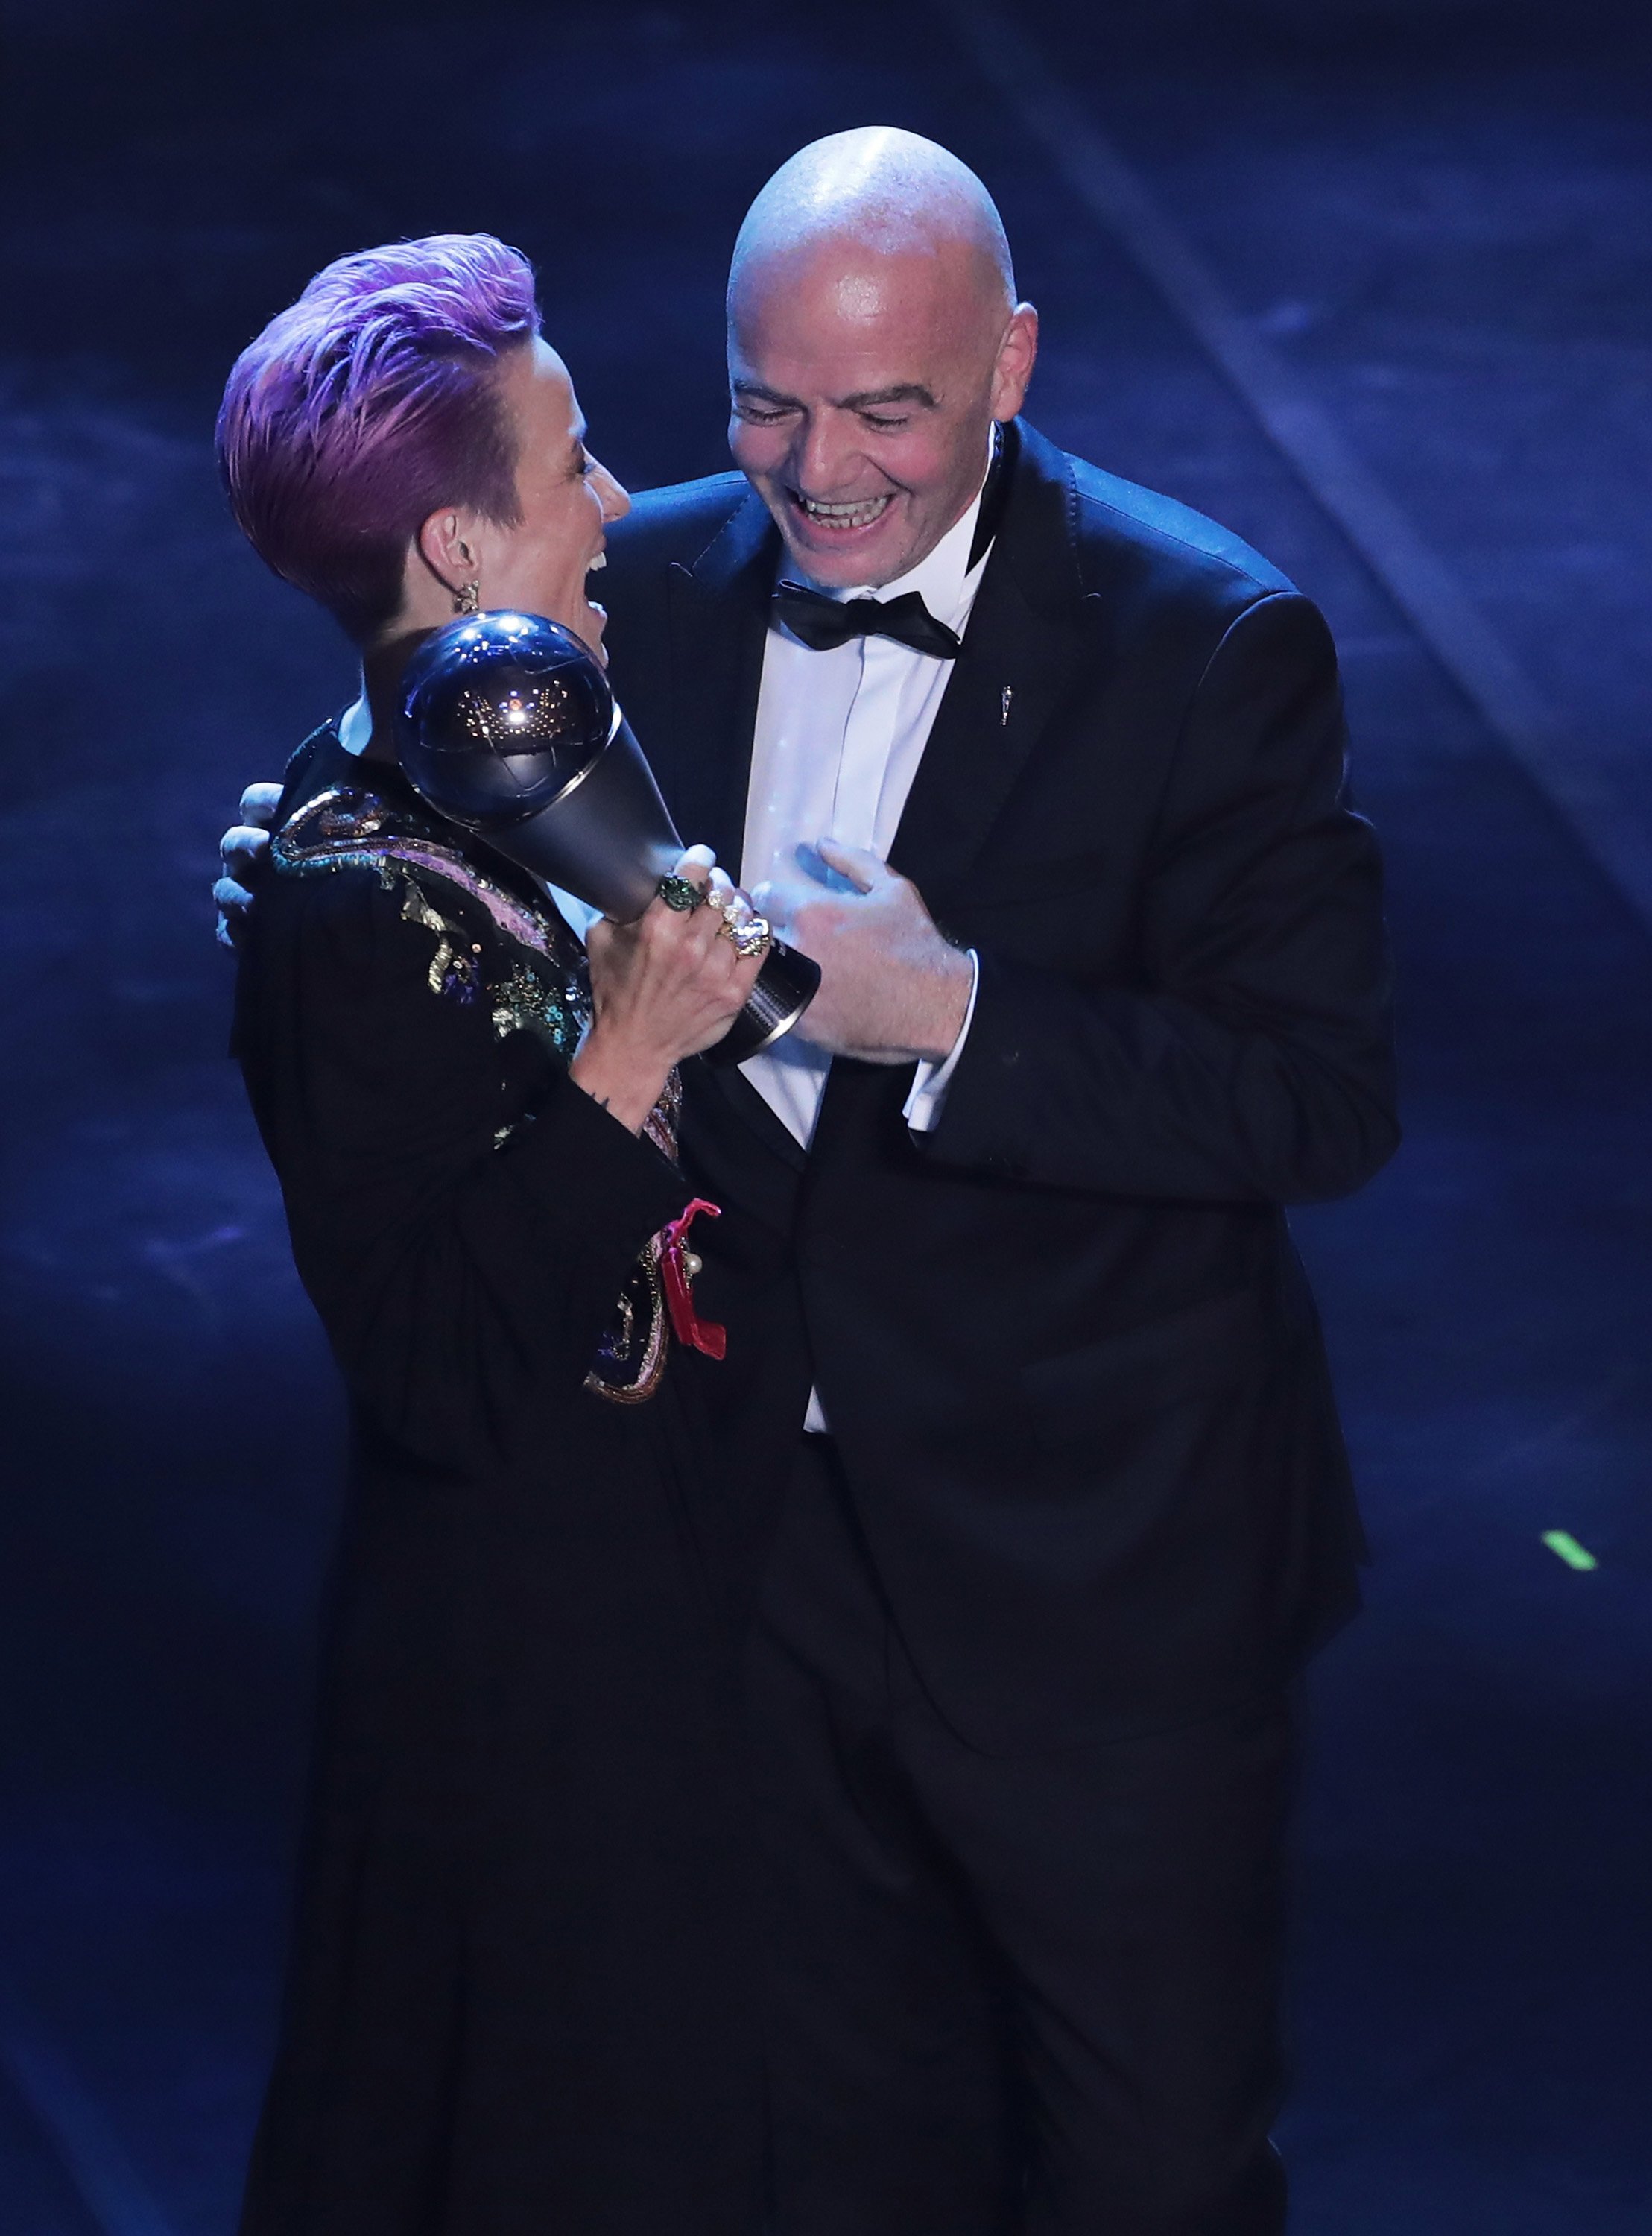  Megan Rapinoe receives The Best FIFA Women's Player of the Year award by FIFA President Gianni Infantino during The Best FIFA Football Awards 2019 on September 23, 2019, in Milan, Italy. | Source: Getty Images.